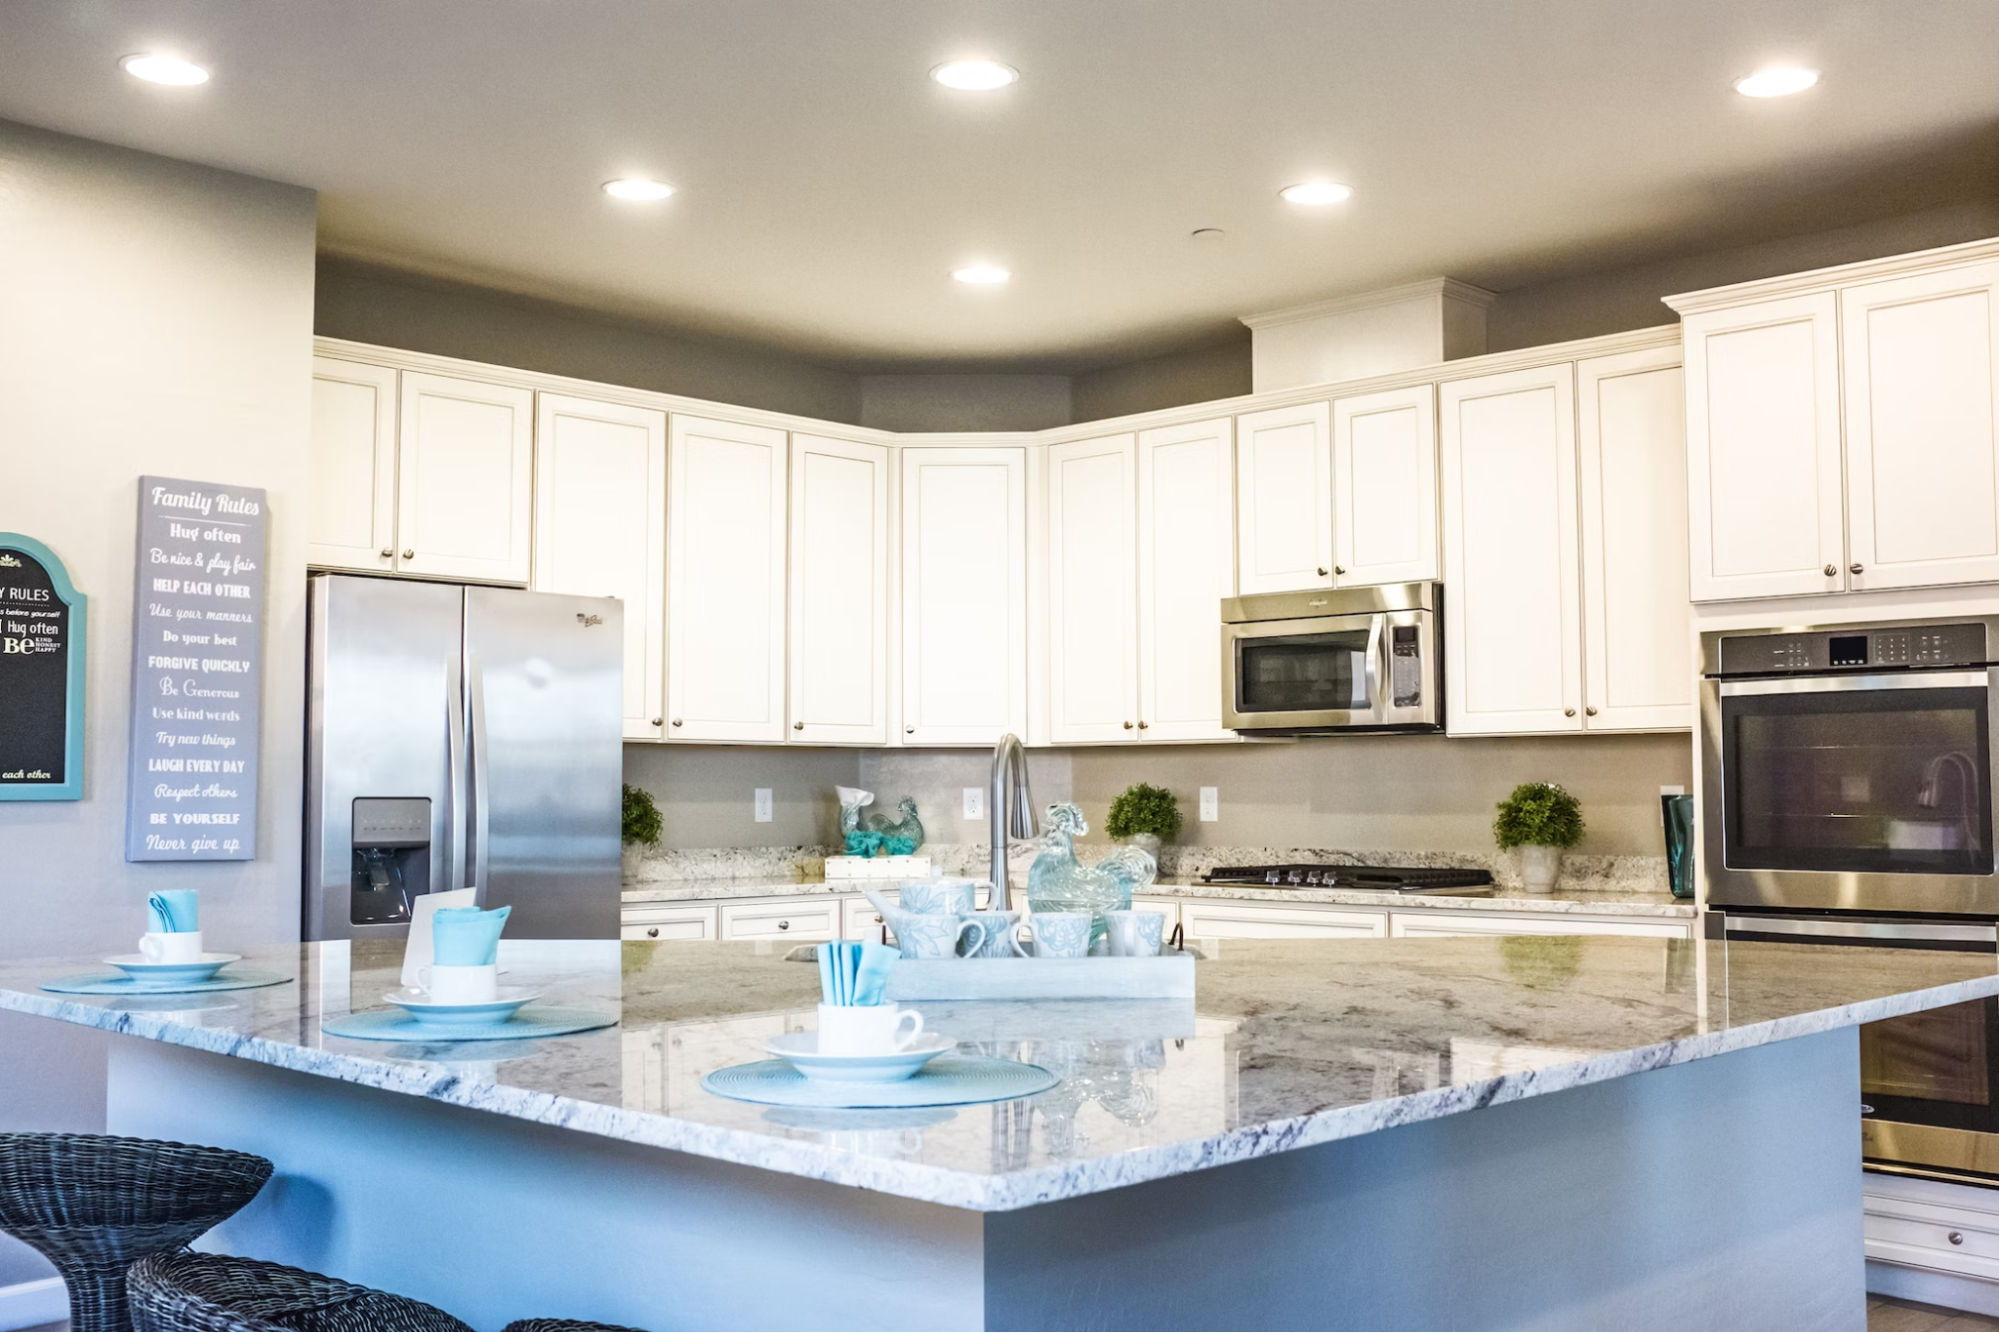 Bright kitchen ideas – tips and tricks on how to illuminate your cooking space with style, 17, eurocraftswfl.com